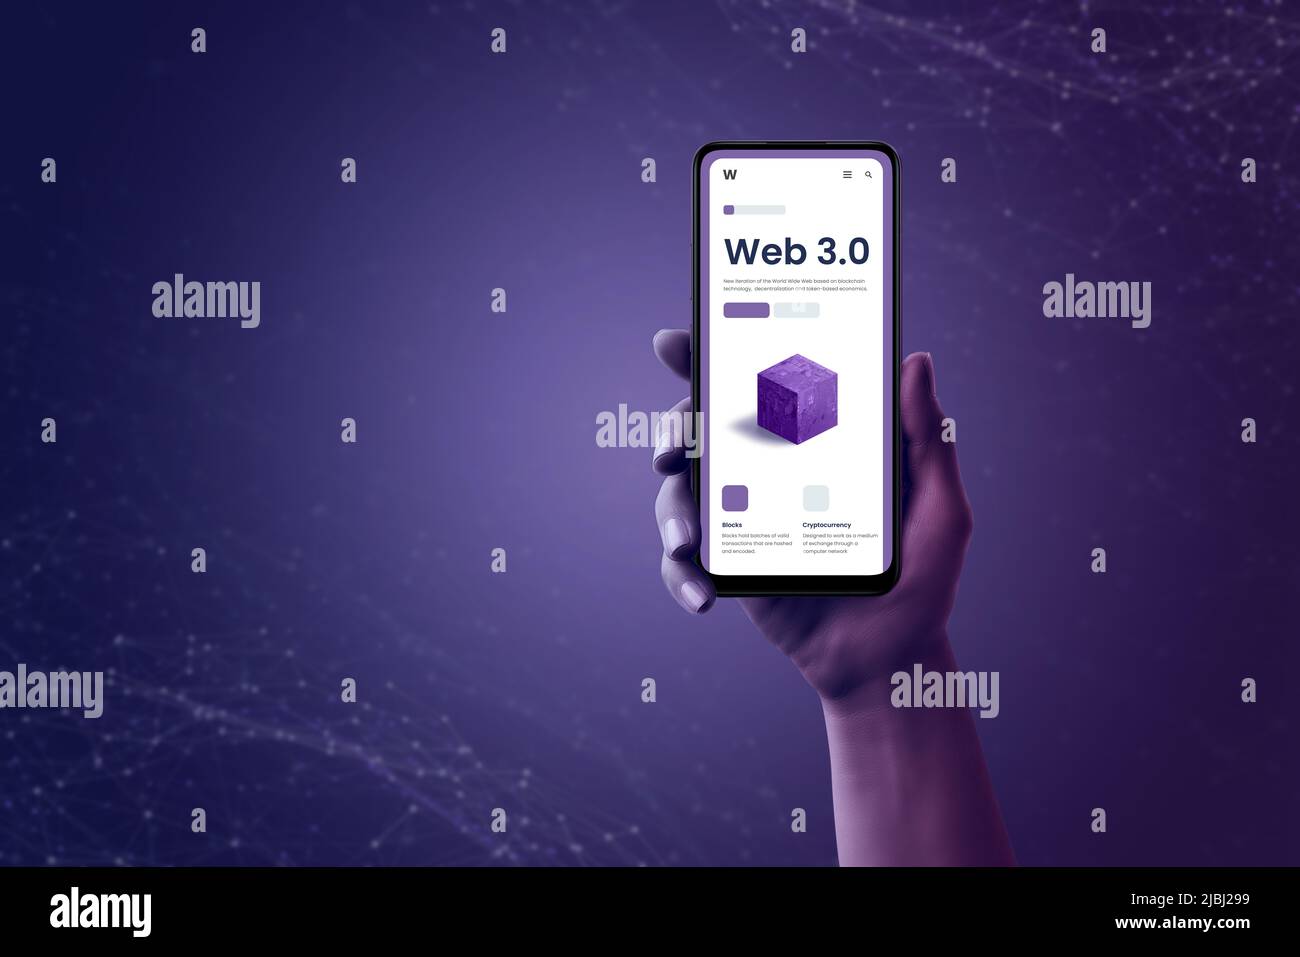 Web 3.0 presentation page on smart phone in hand concept. Purple background with network nodes Stock Photo